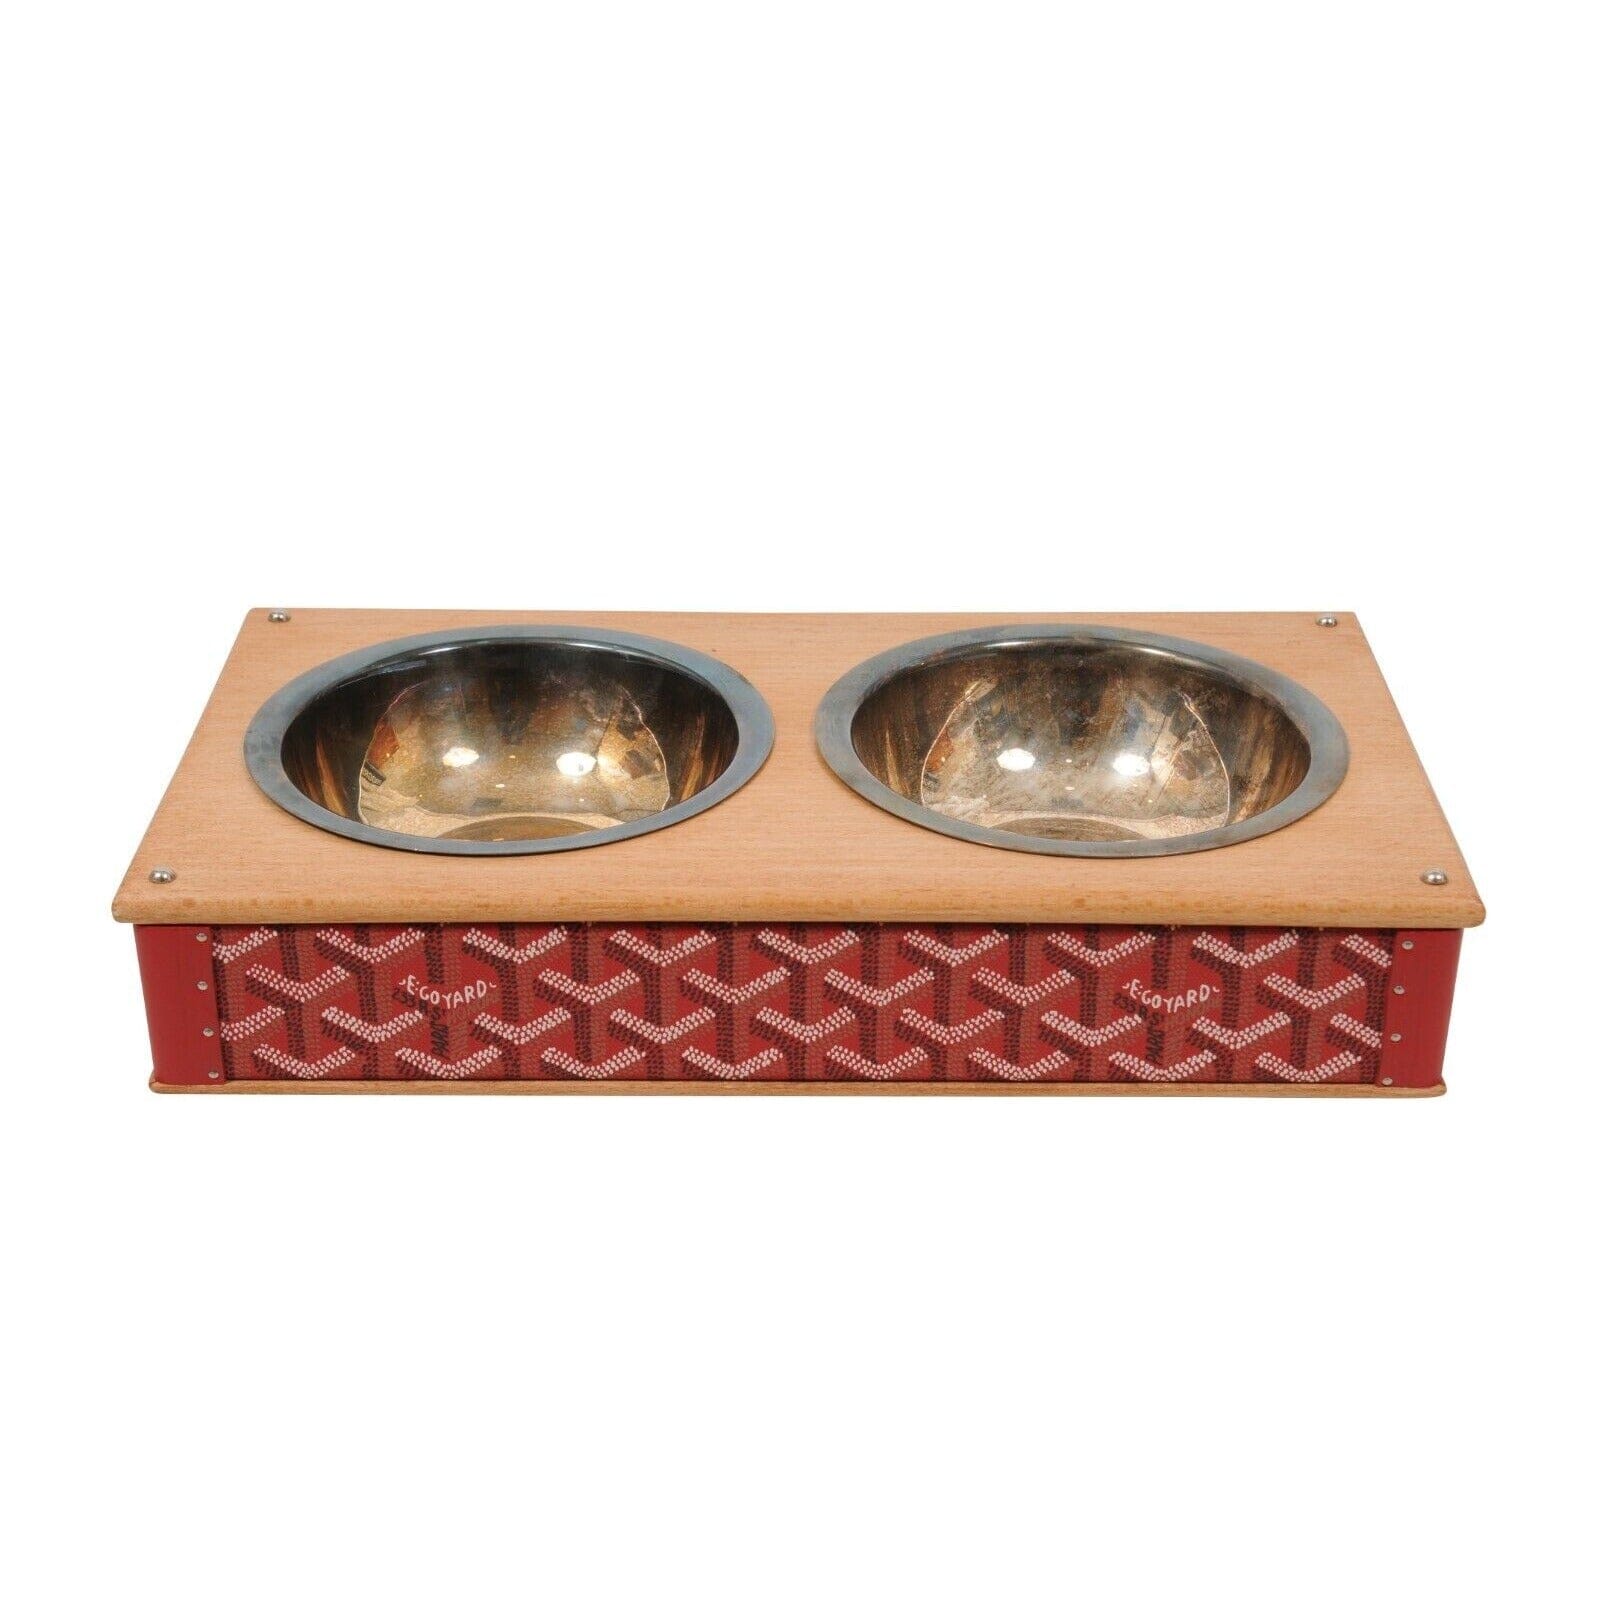 Hexagon GG pet bowl in bege and ebony Supreme